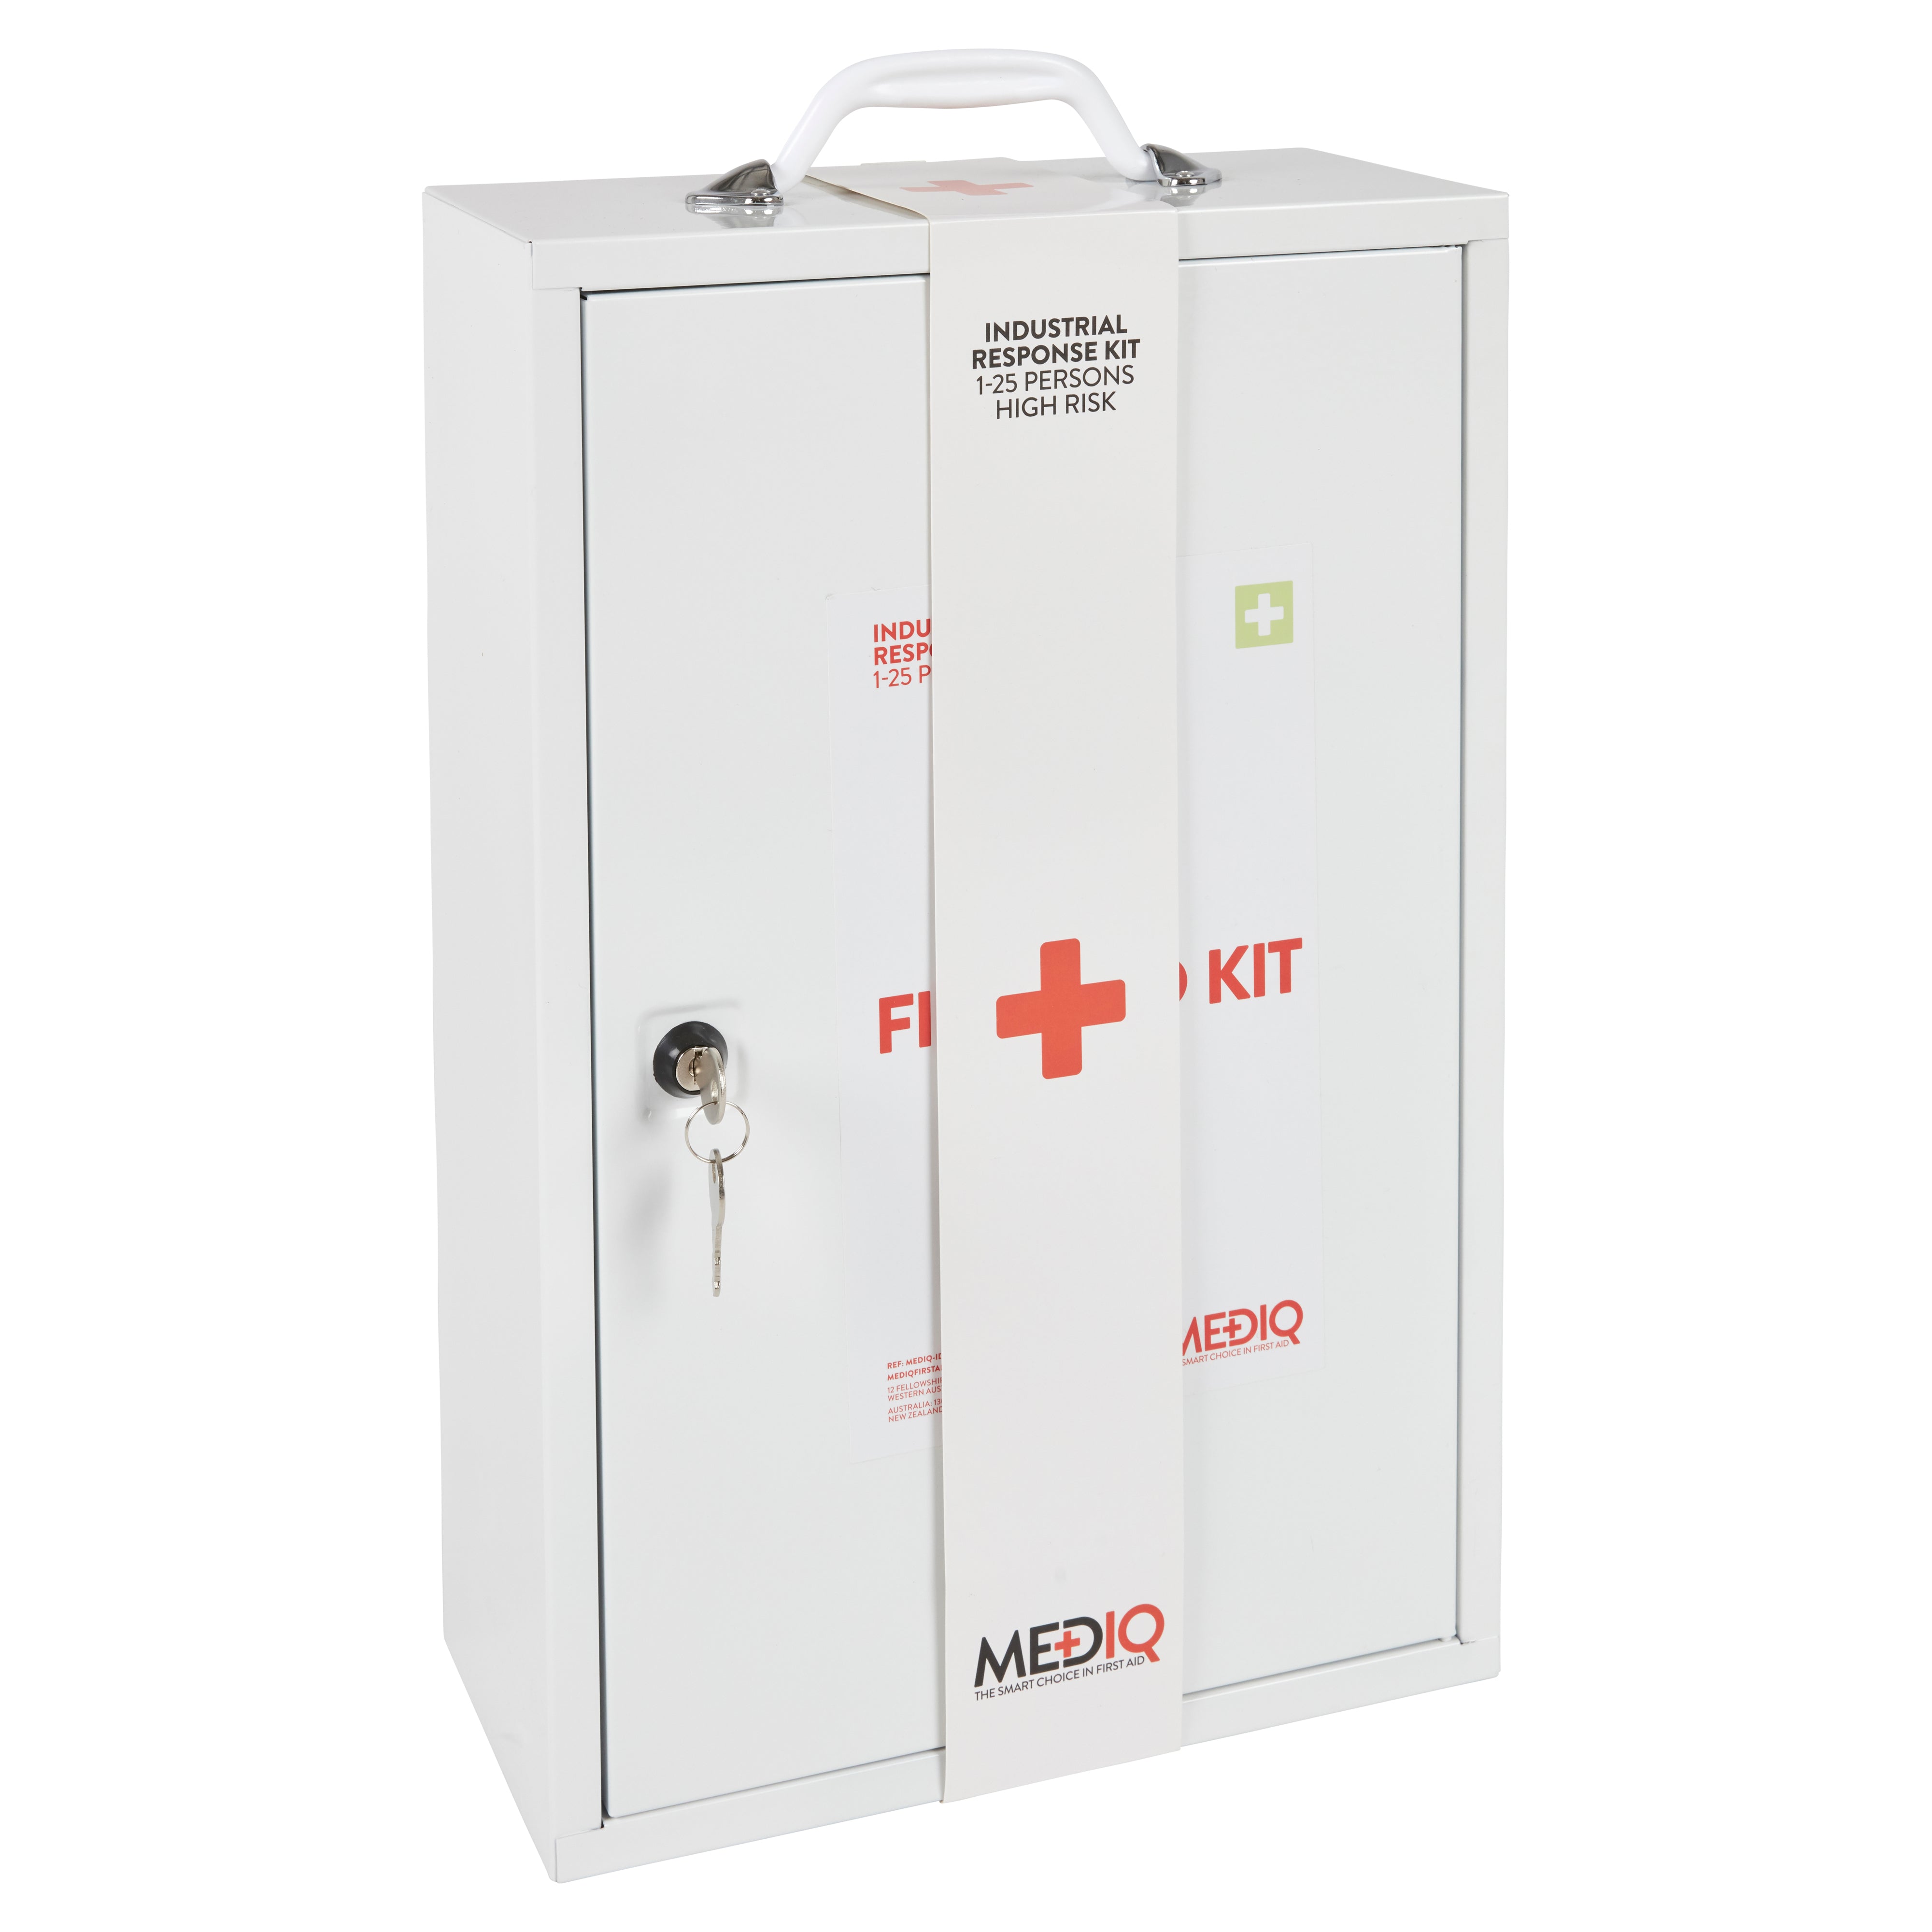 Mediq Essential Industrial Response Kit - Metal Cabinet (High Risk) - WHSAFETY